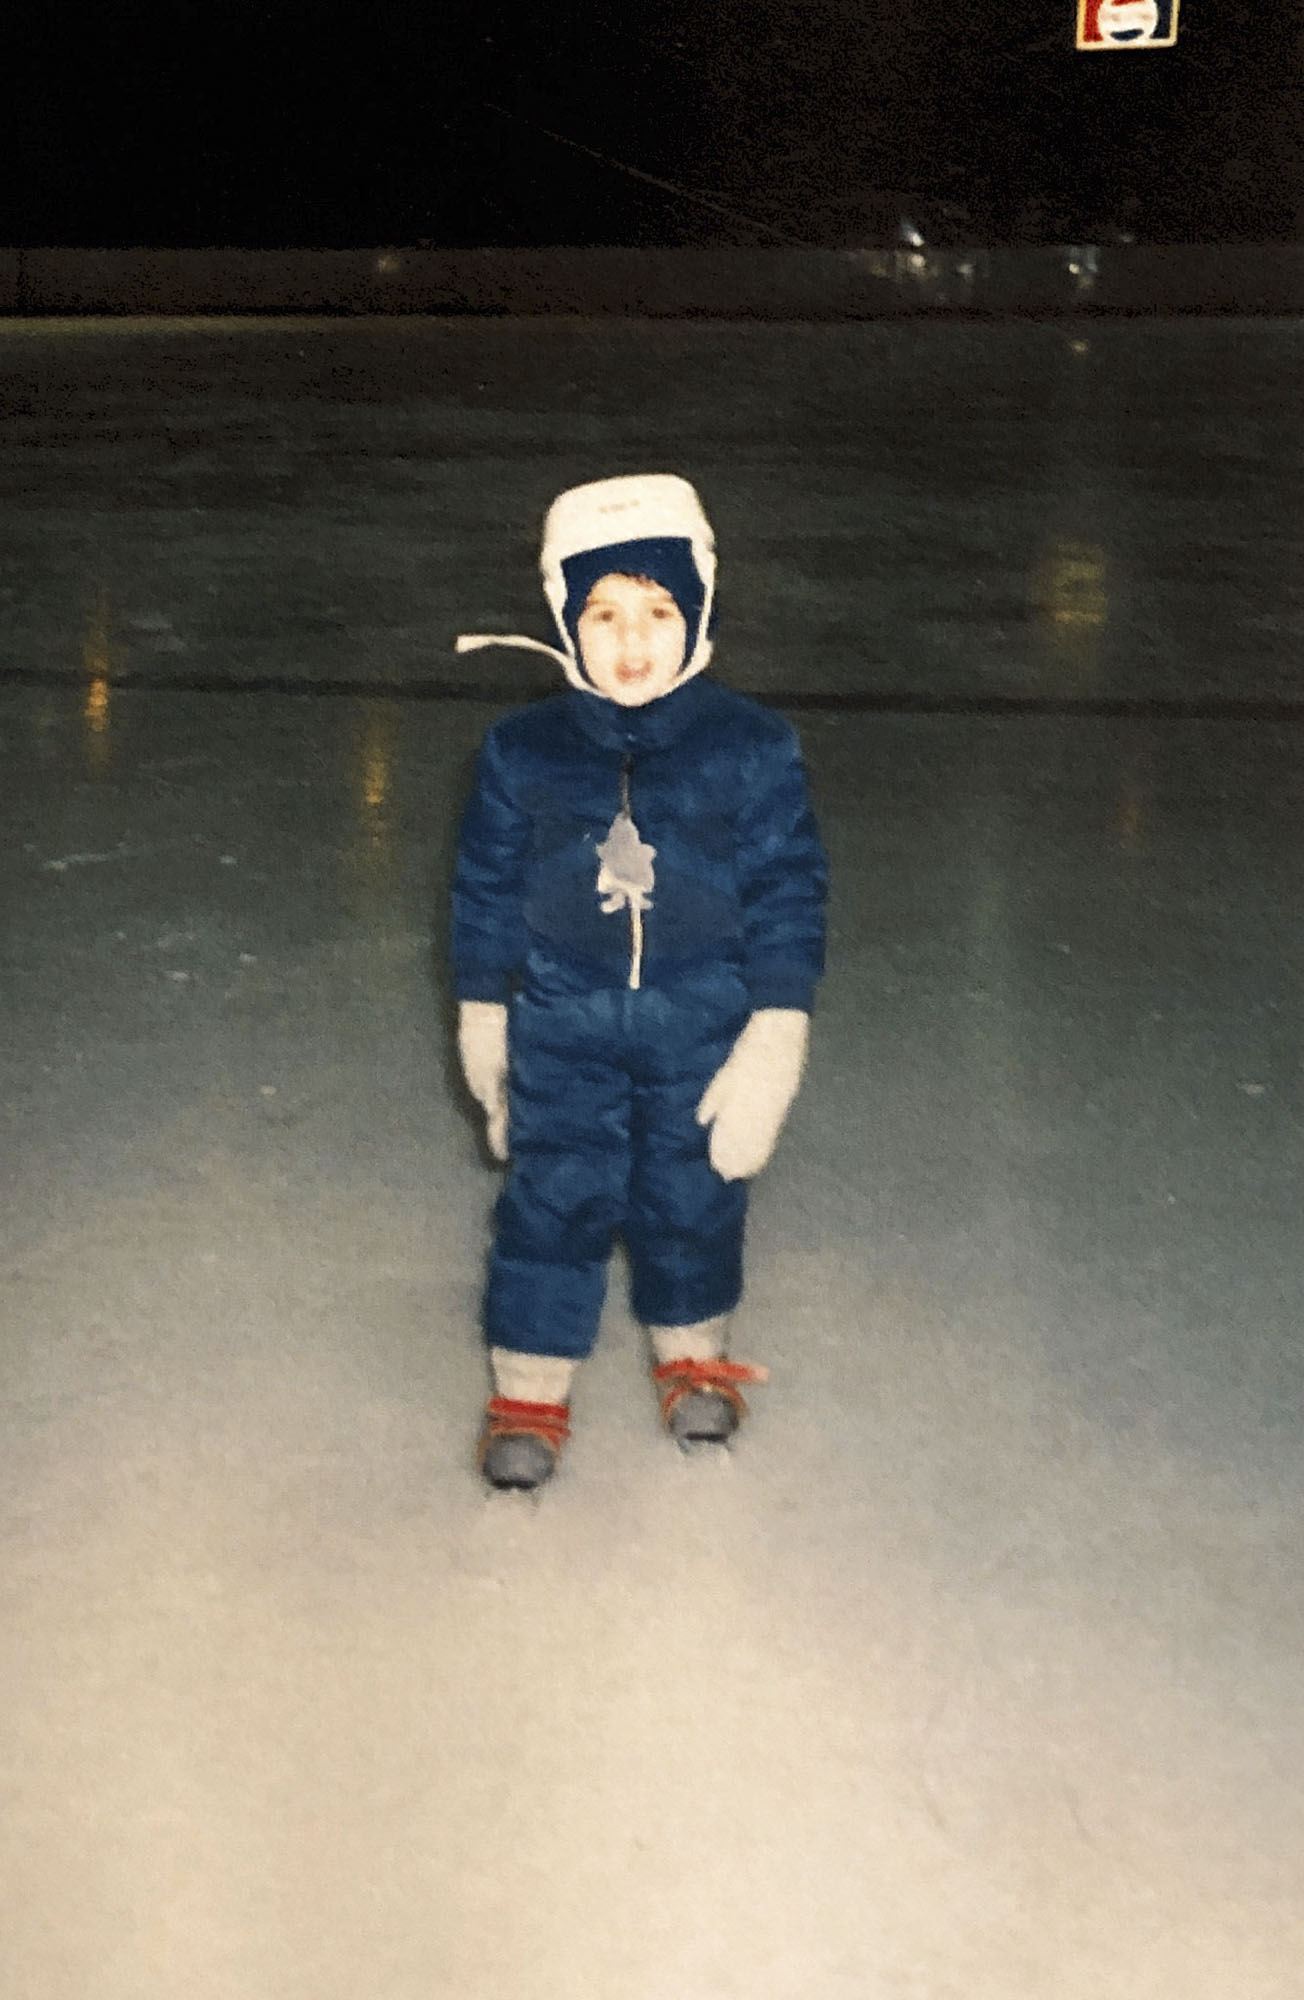 Christopher Ali as a child in a puffy suit and in skates on the ice